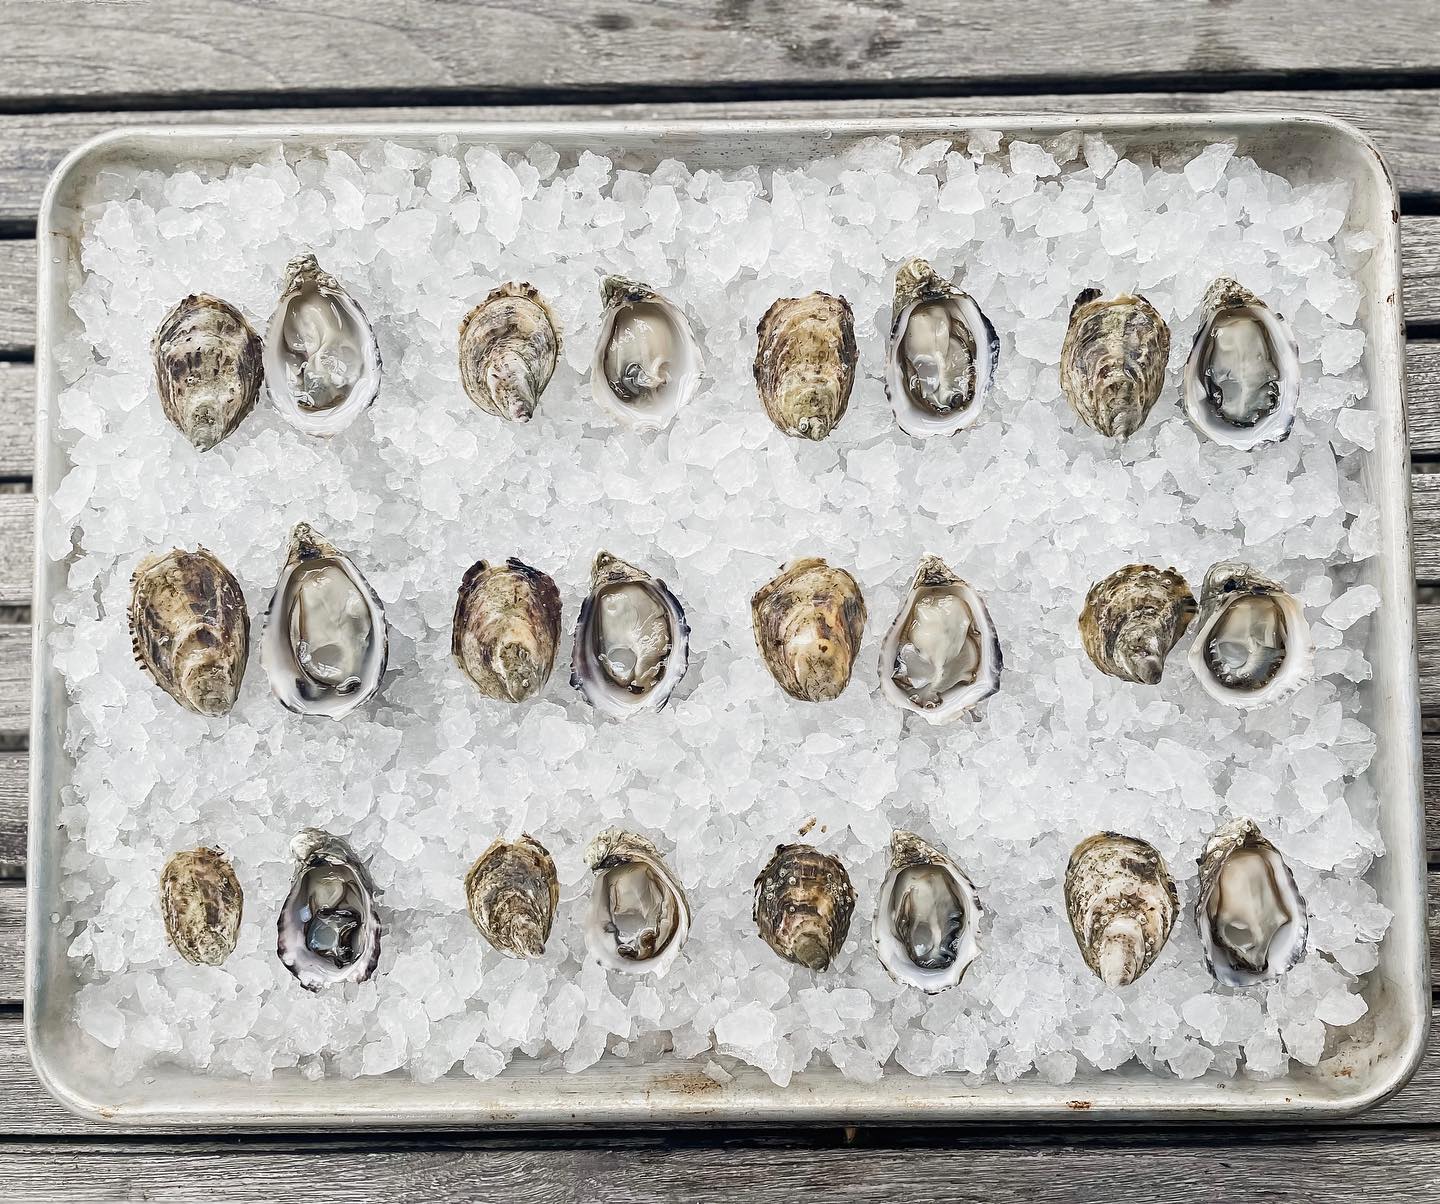 A dozen freshly shucked oysters on a bed of ice.